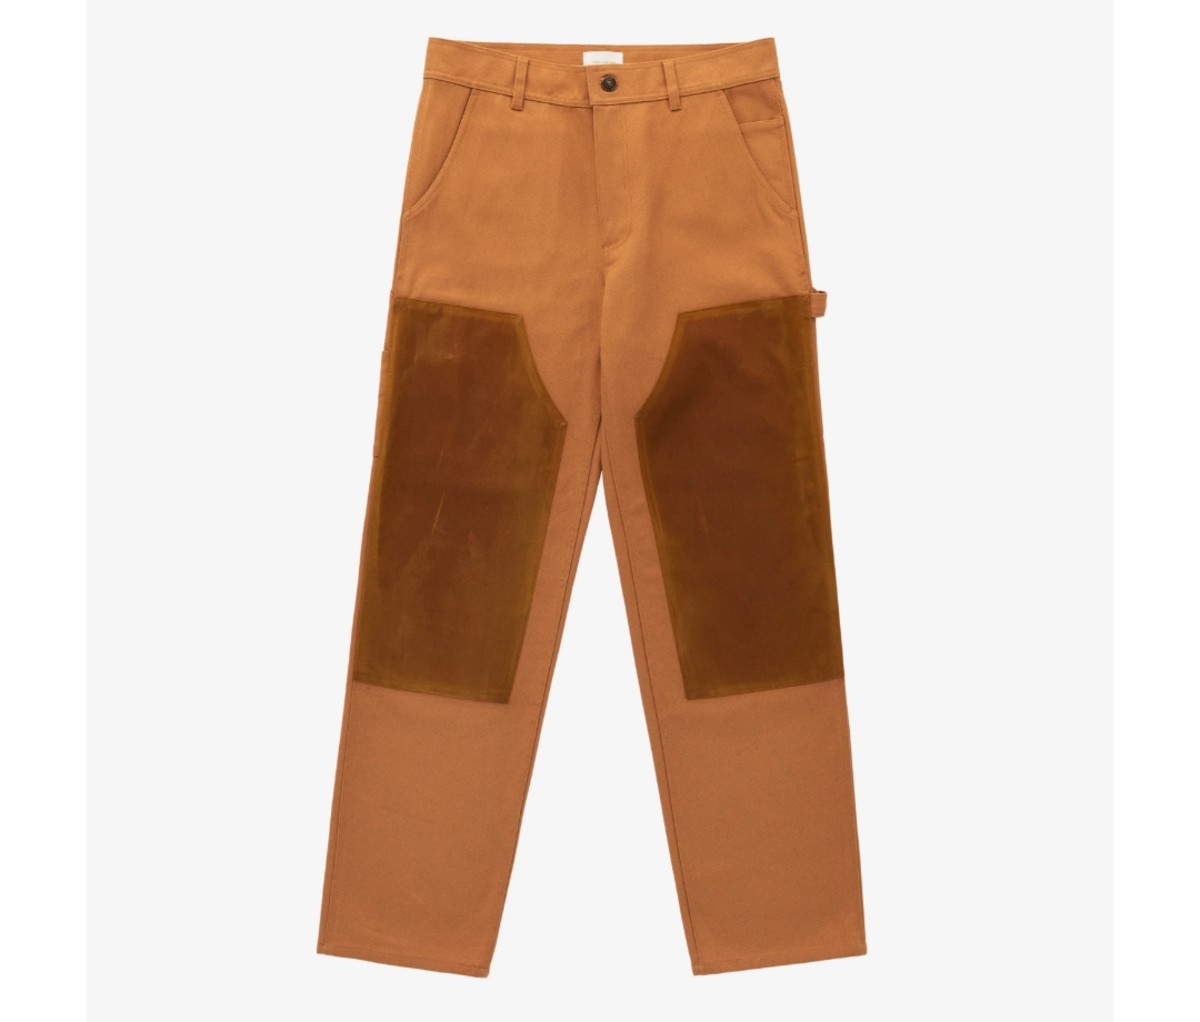 Style Pick of the Week: Myles Apparel Tour Pants – The Best